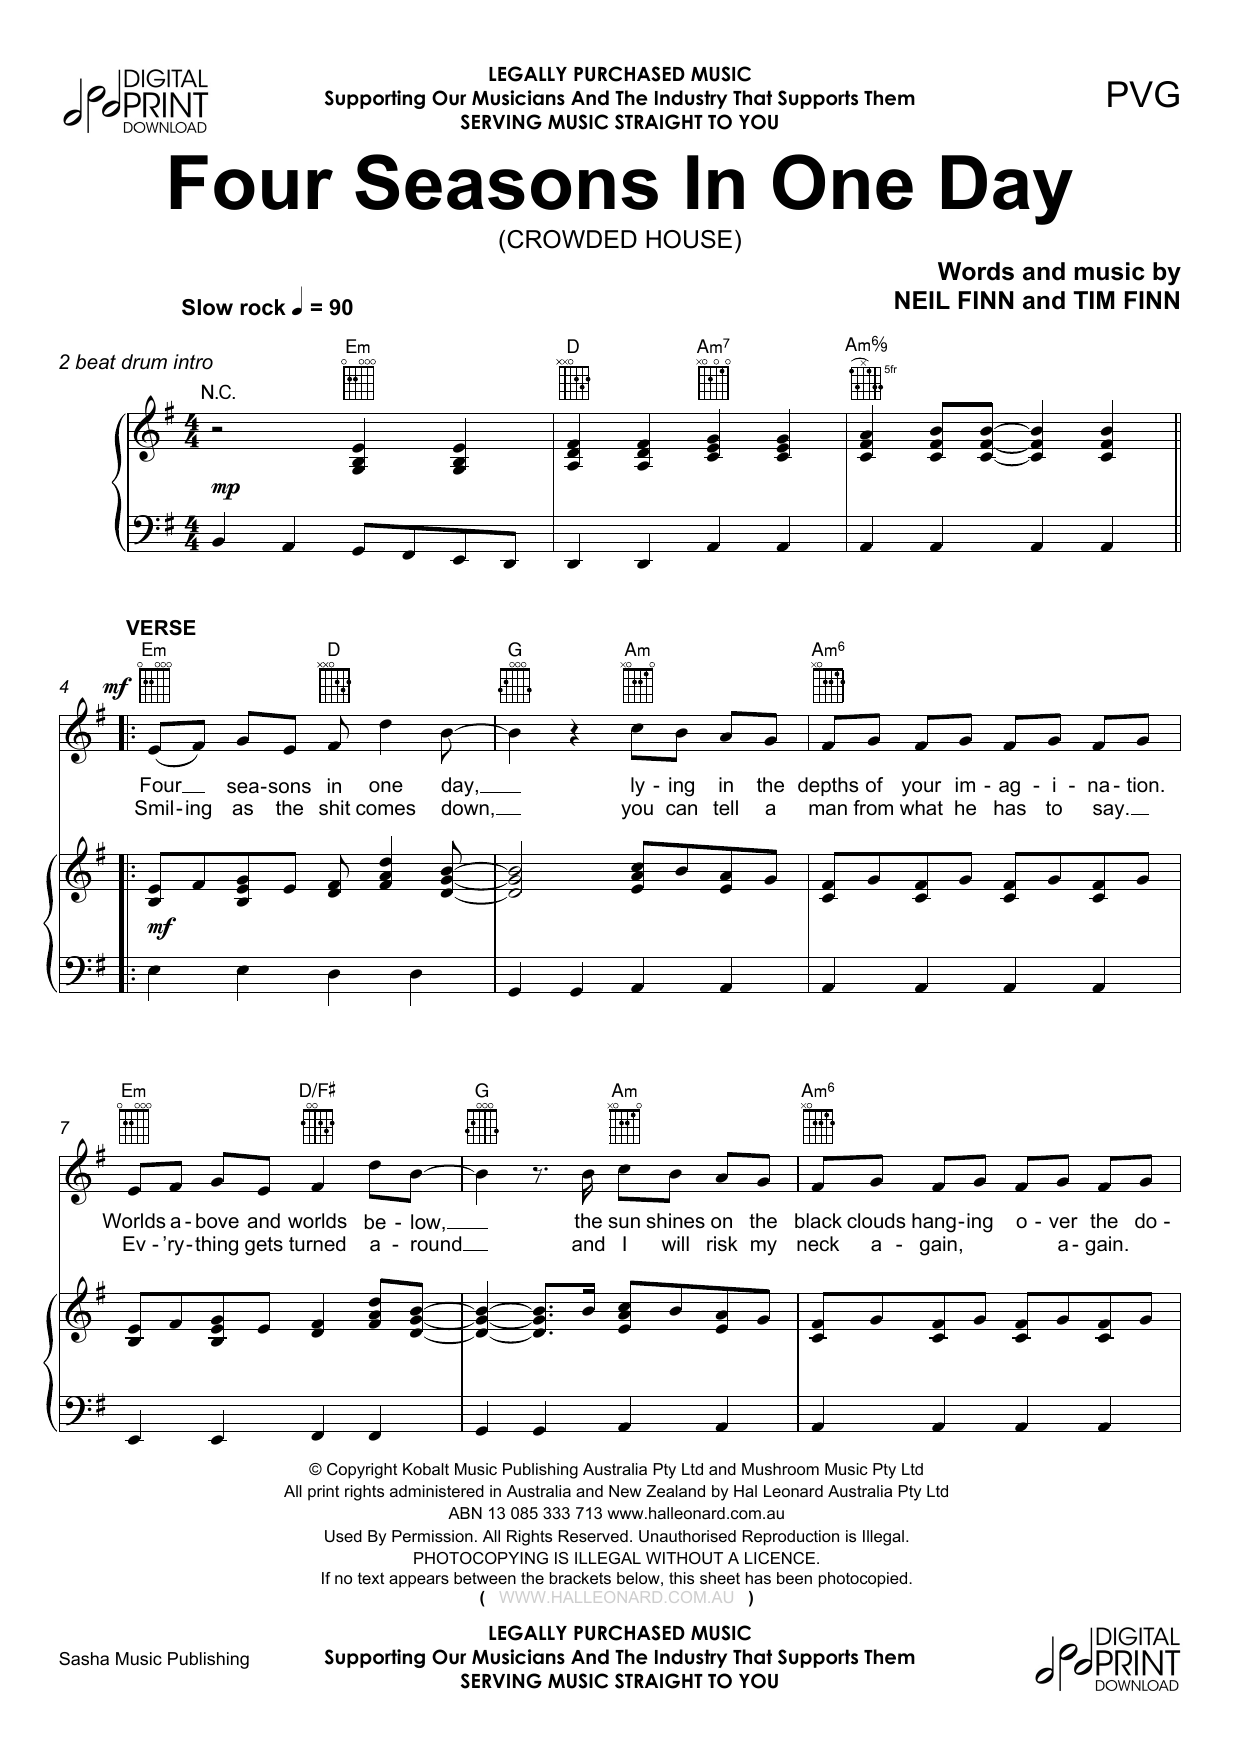 Download Crowded House Four Seasons In One Day Sheet Music